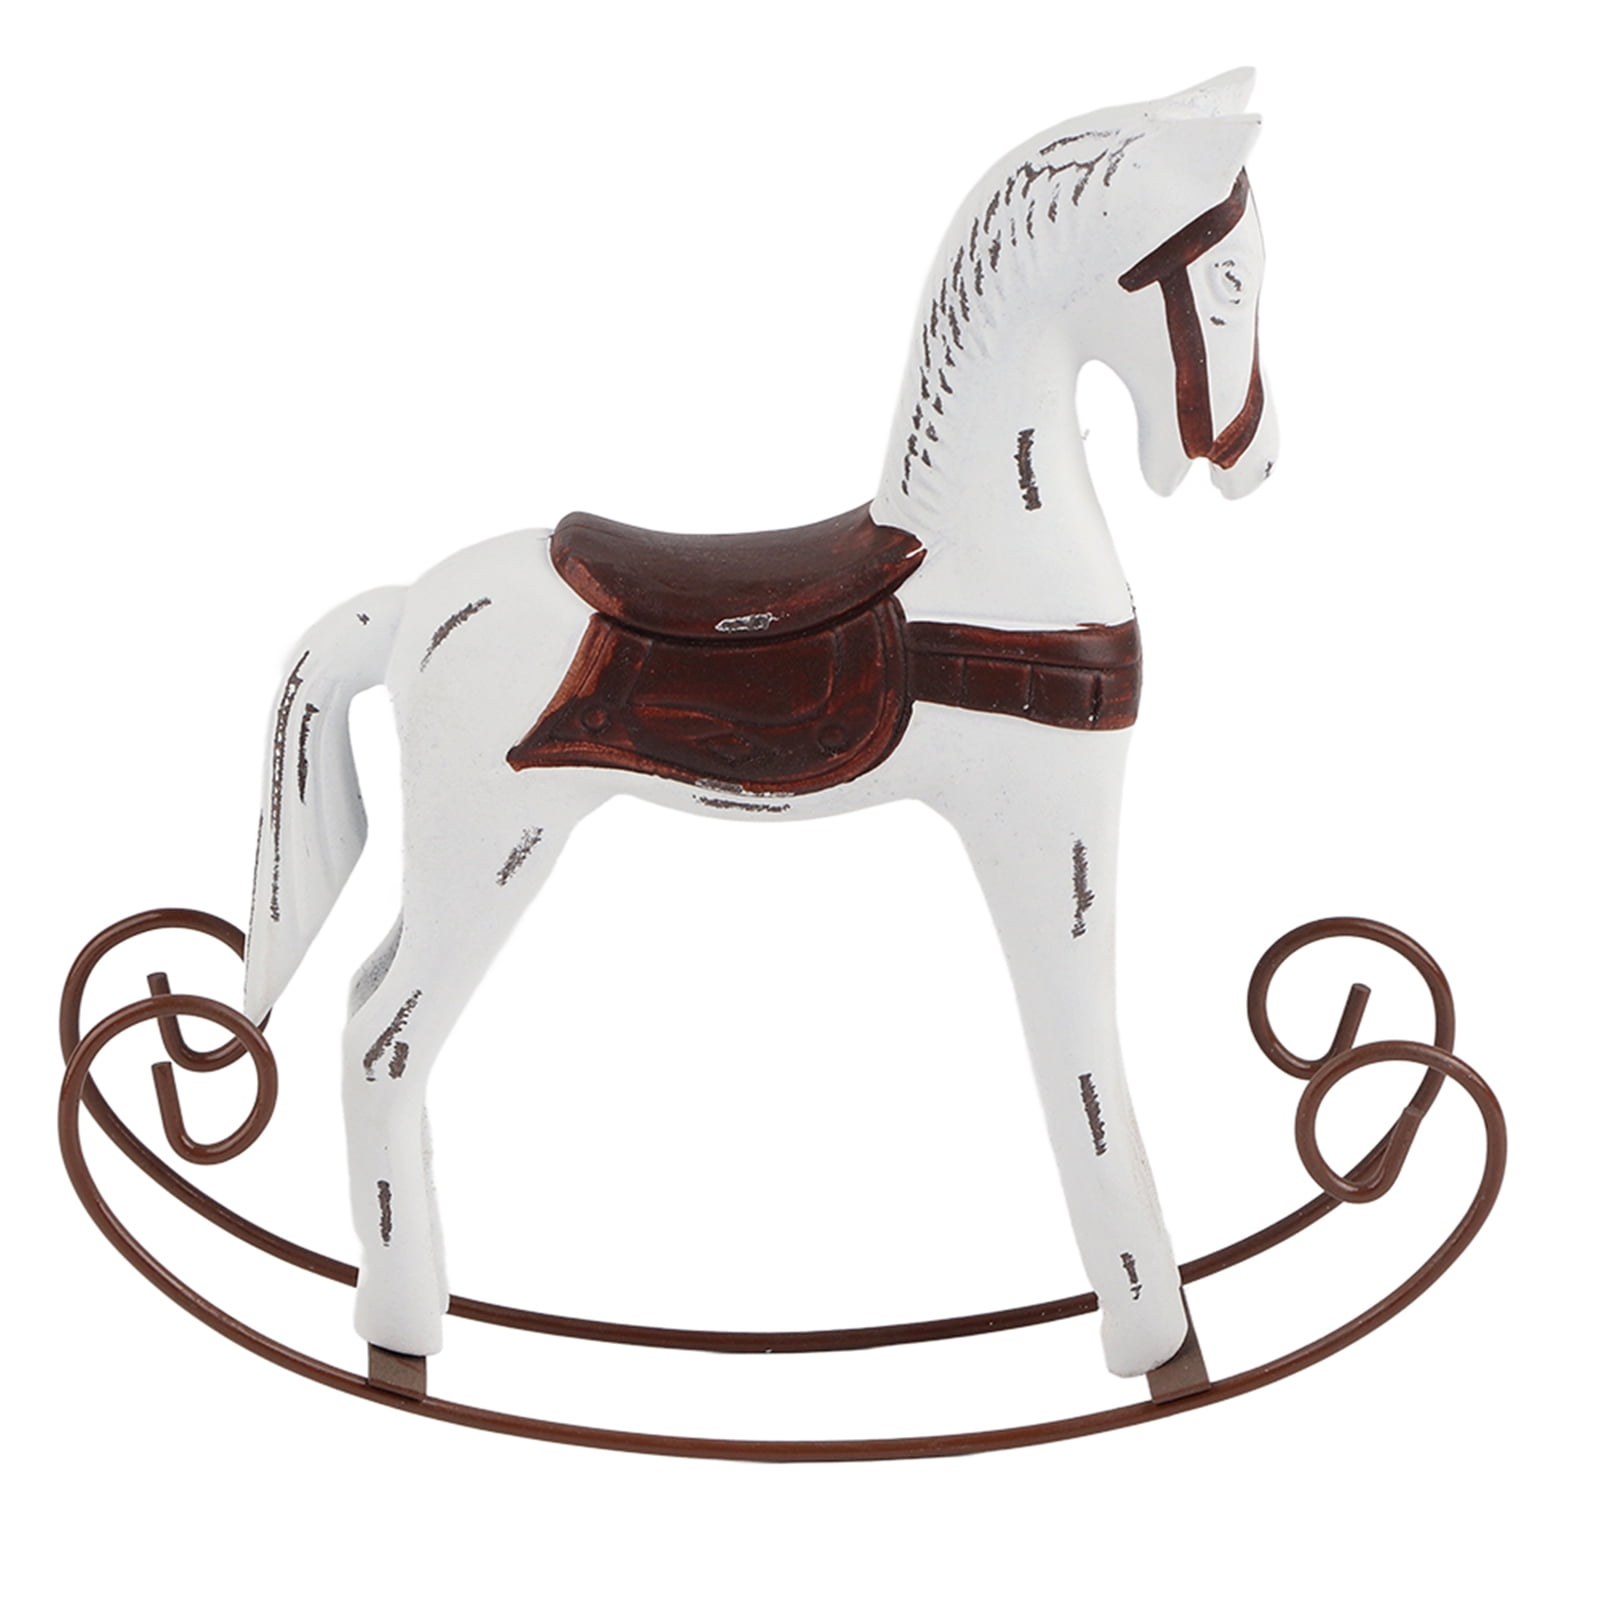 Brand New LUXURIOUS EXTRA LARGE Rocking Horse "CHAMPION" SIZE XL age 6-13 years 